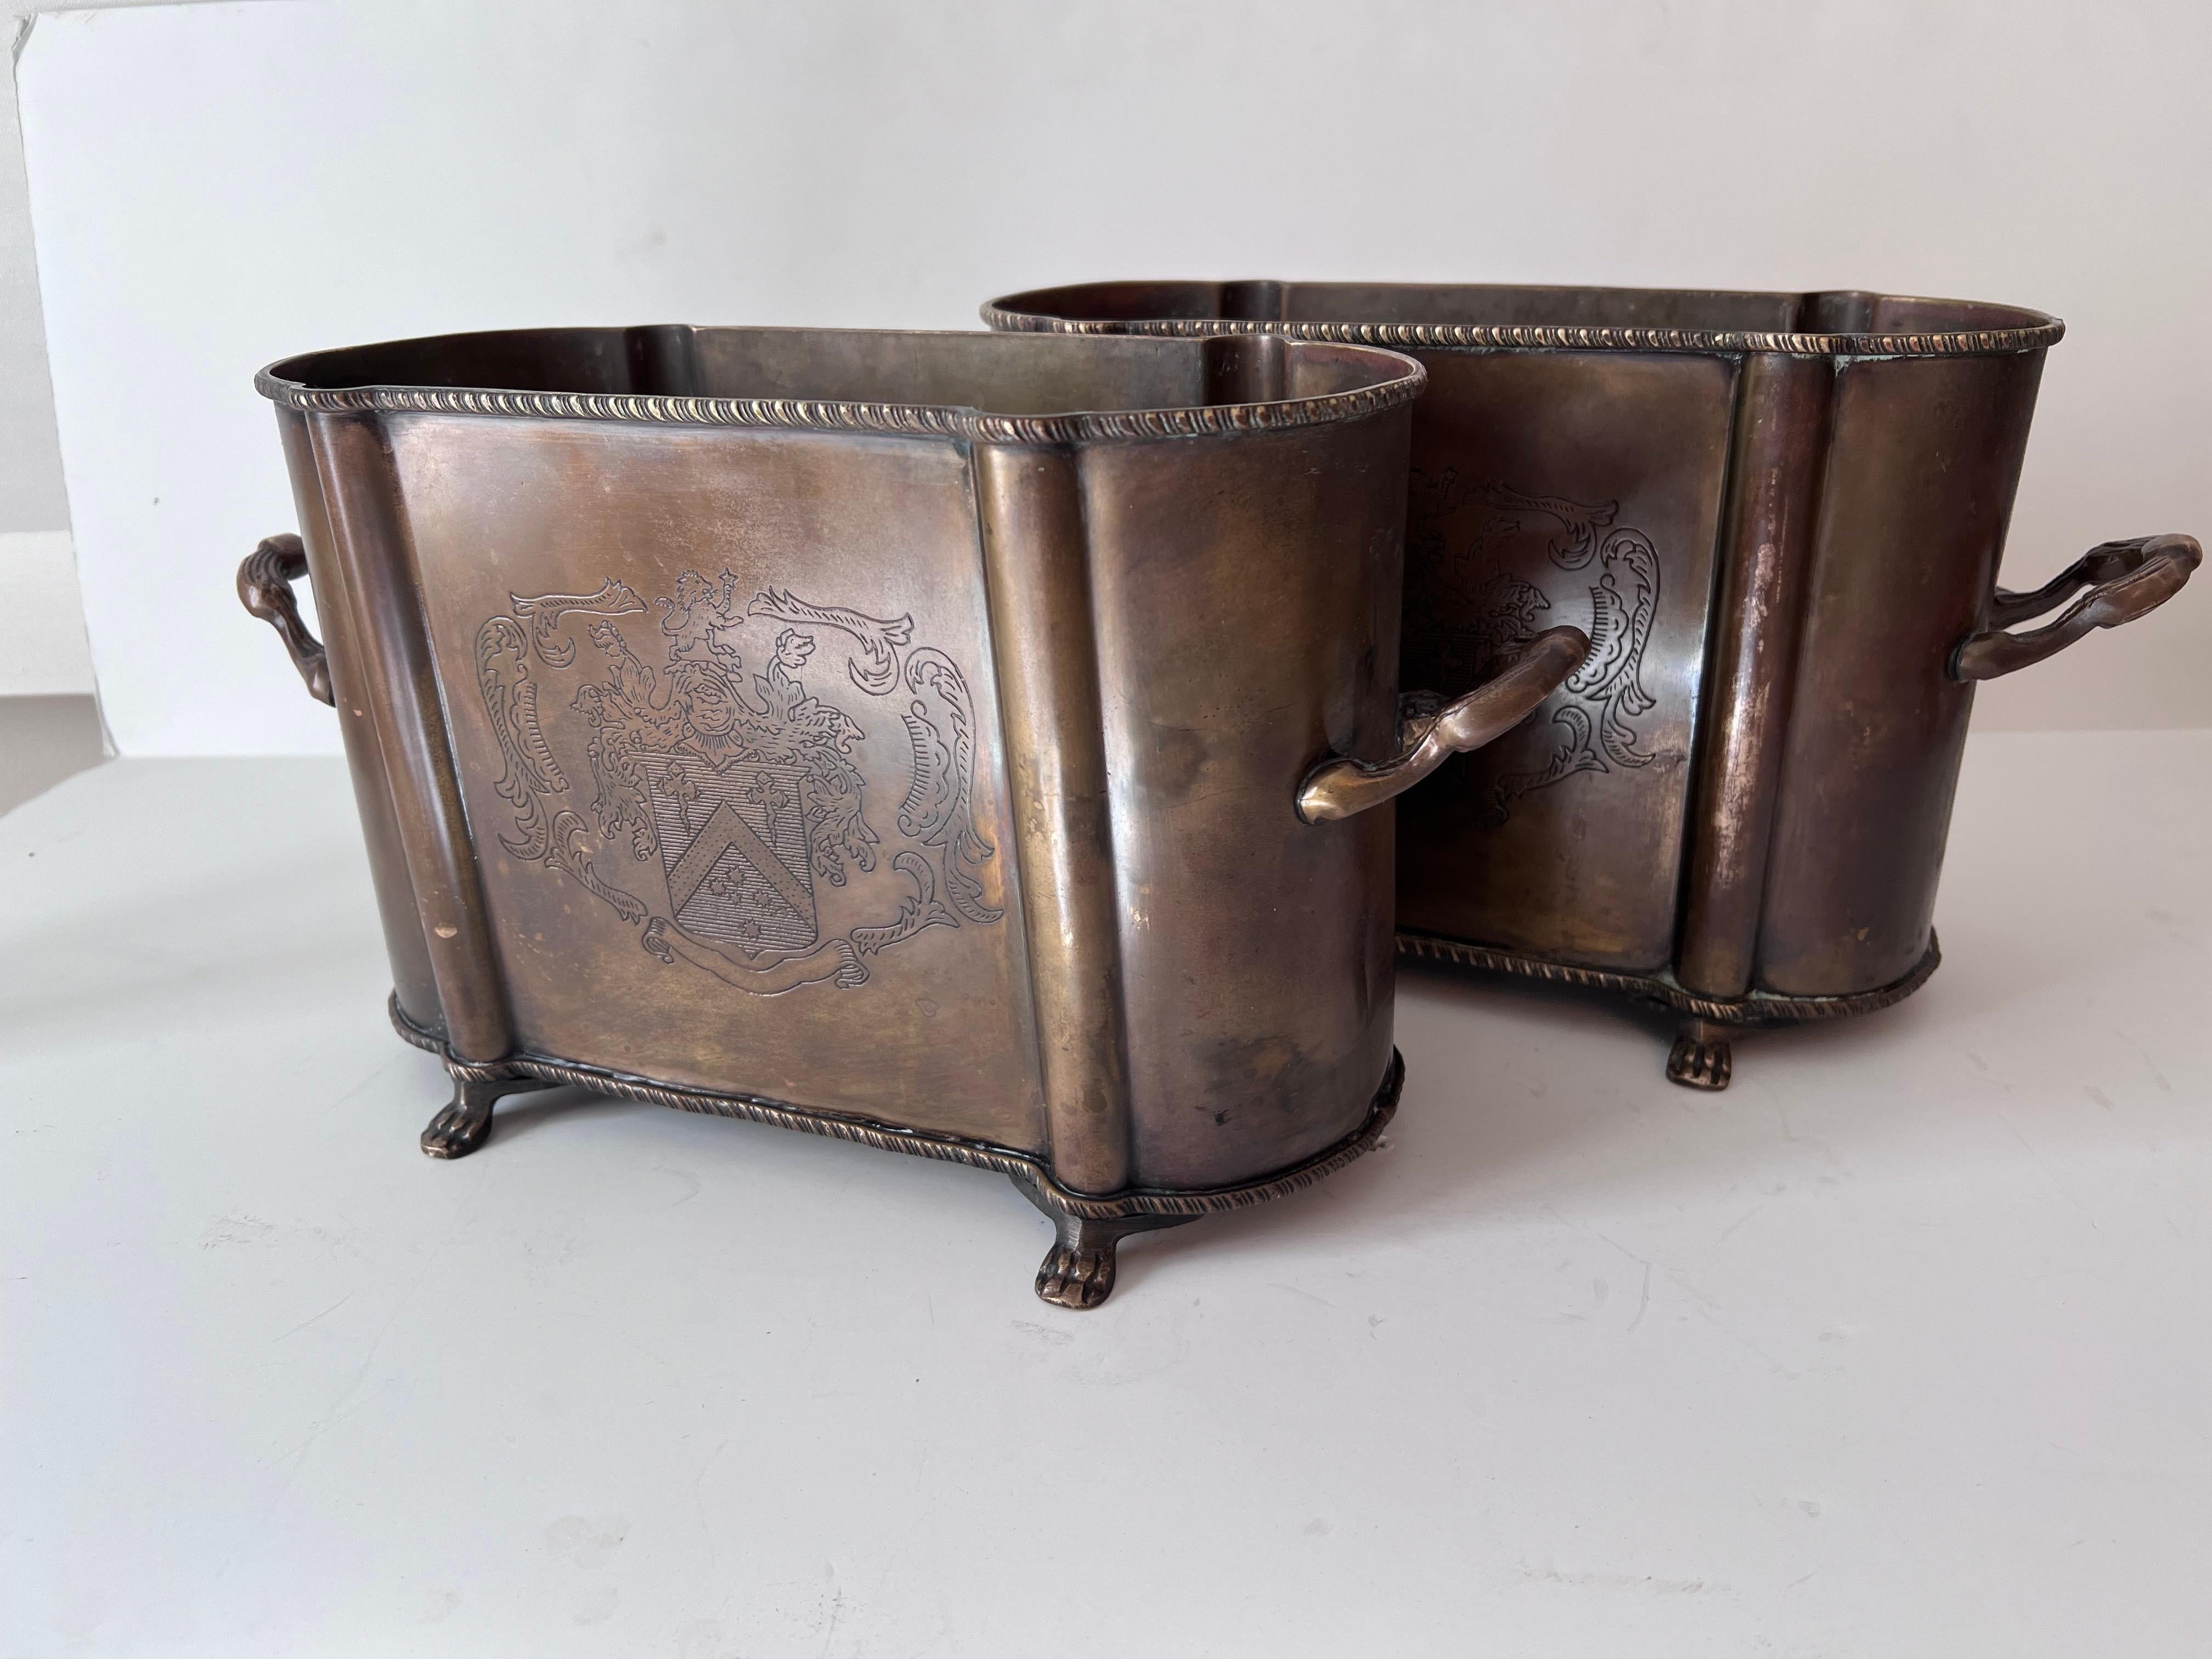 20th Century Pair of English Metal Cachepots or Jardinieres with Claw Feet and a Crest from